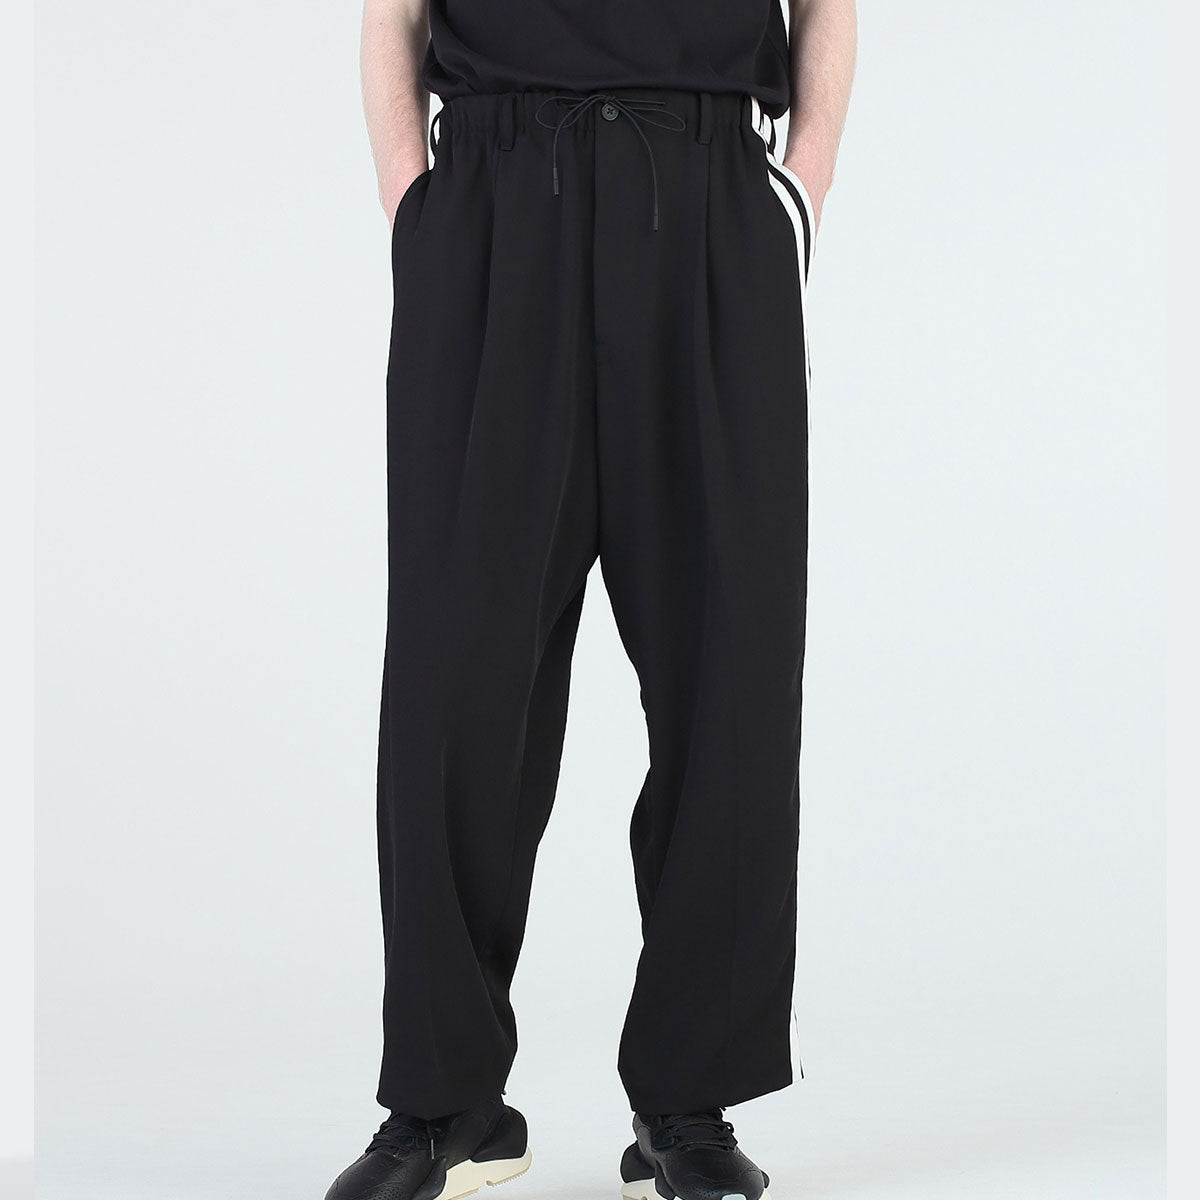 M CH1 ELEGANT 3 STP PANTS - Why are you here?